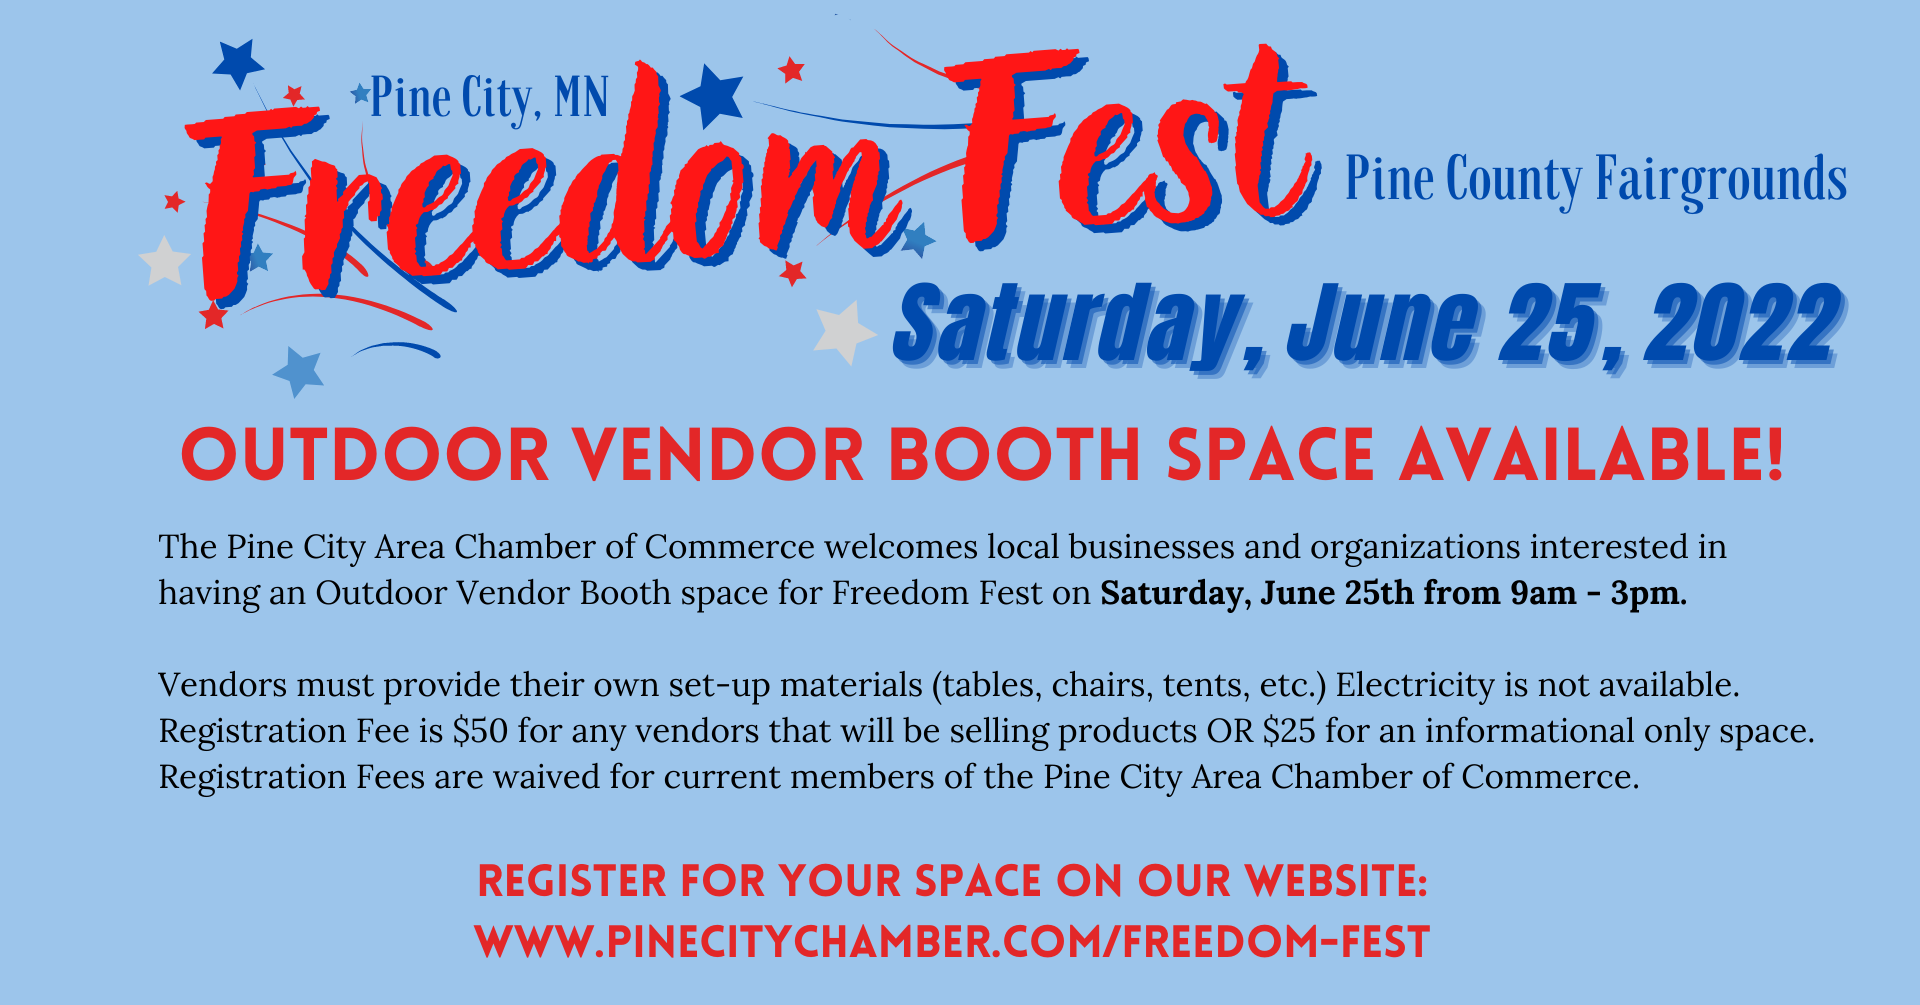 Vendor Booth Space Available at Freedom Fest 2022 Pine City Area